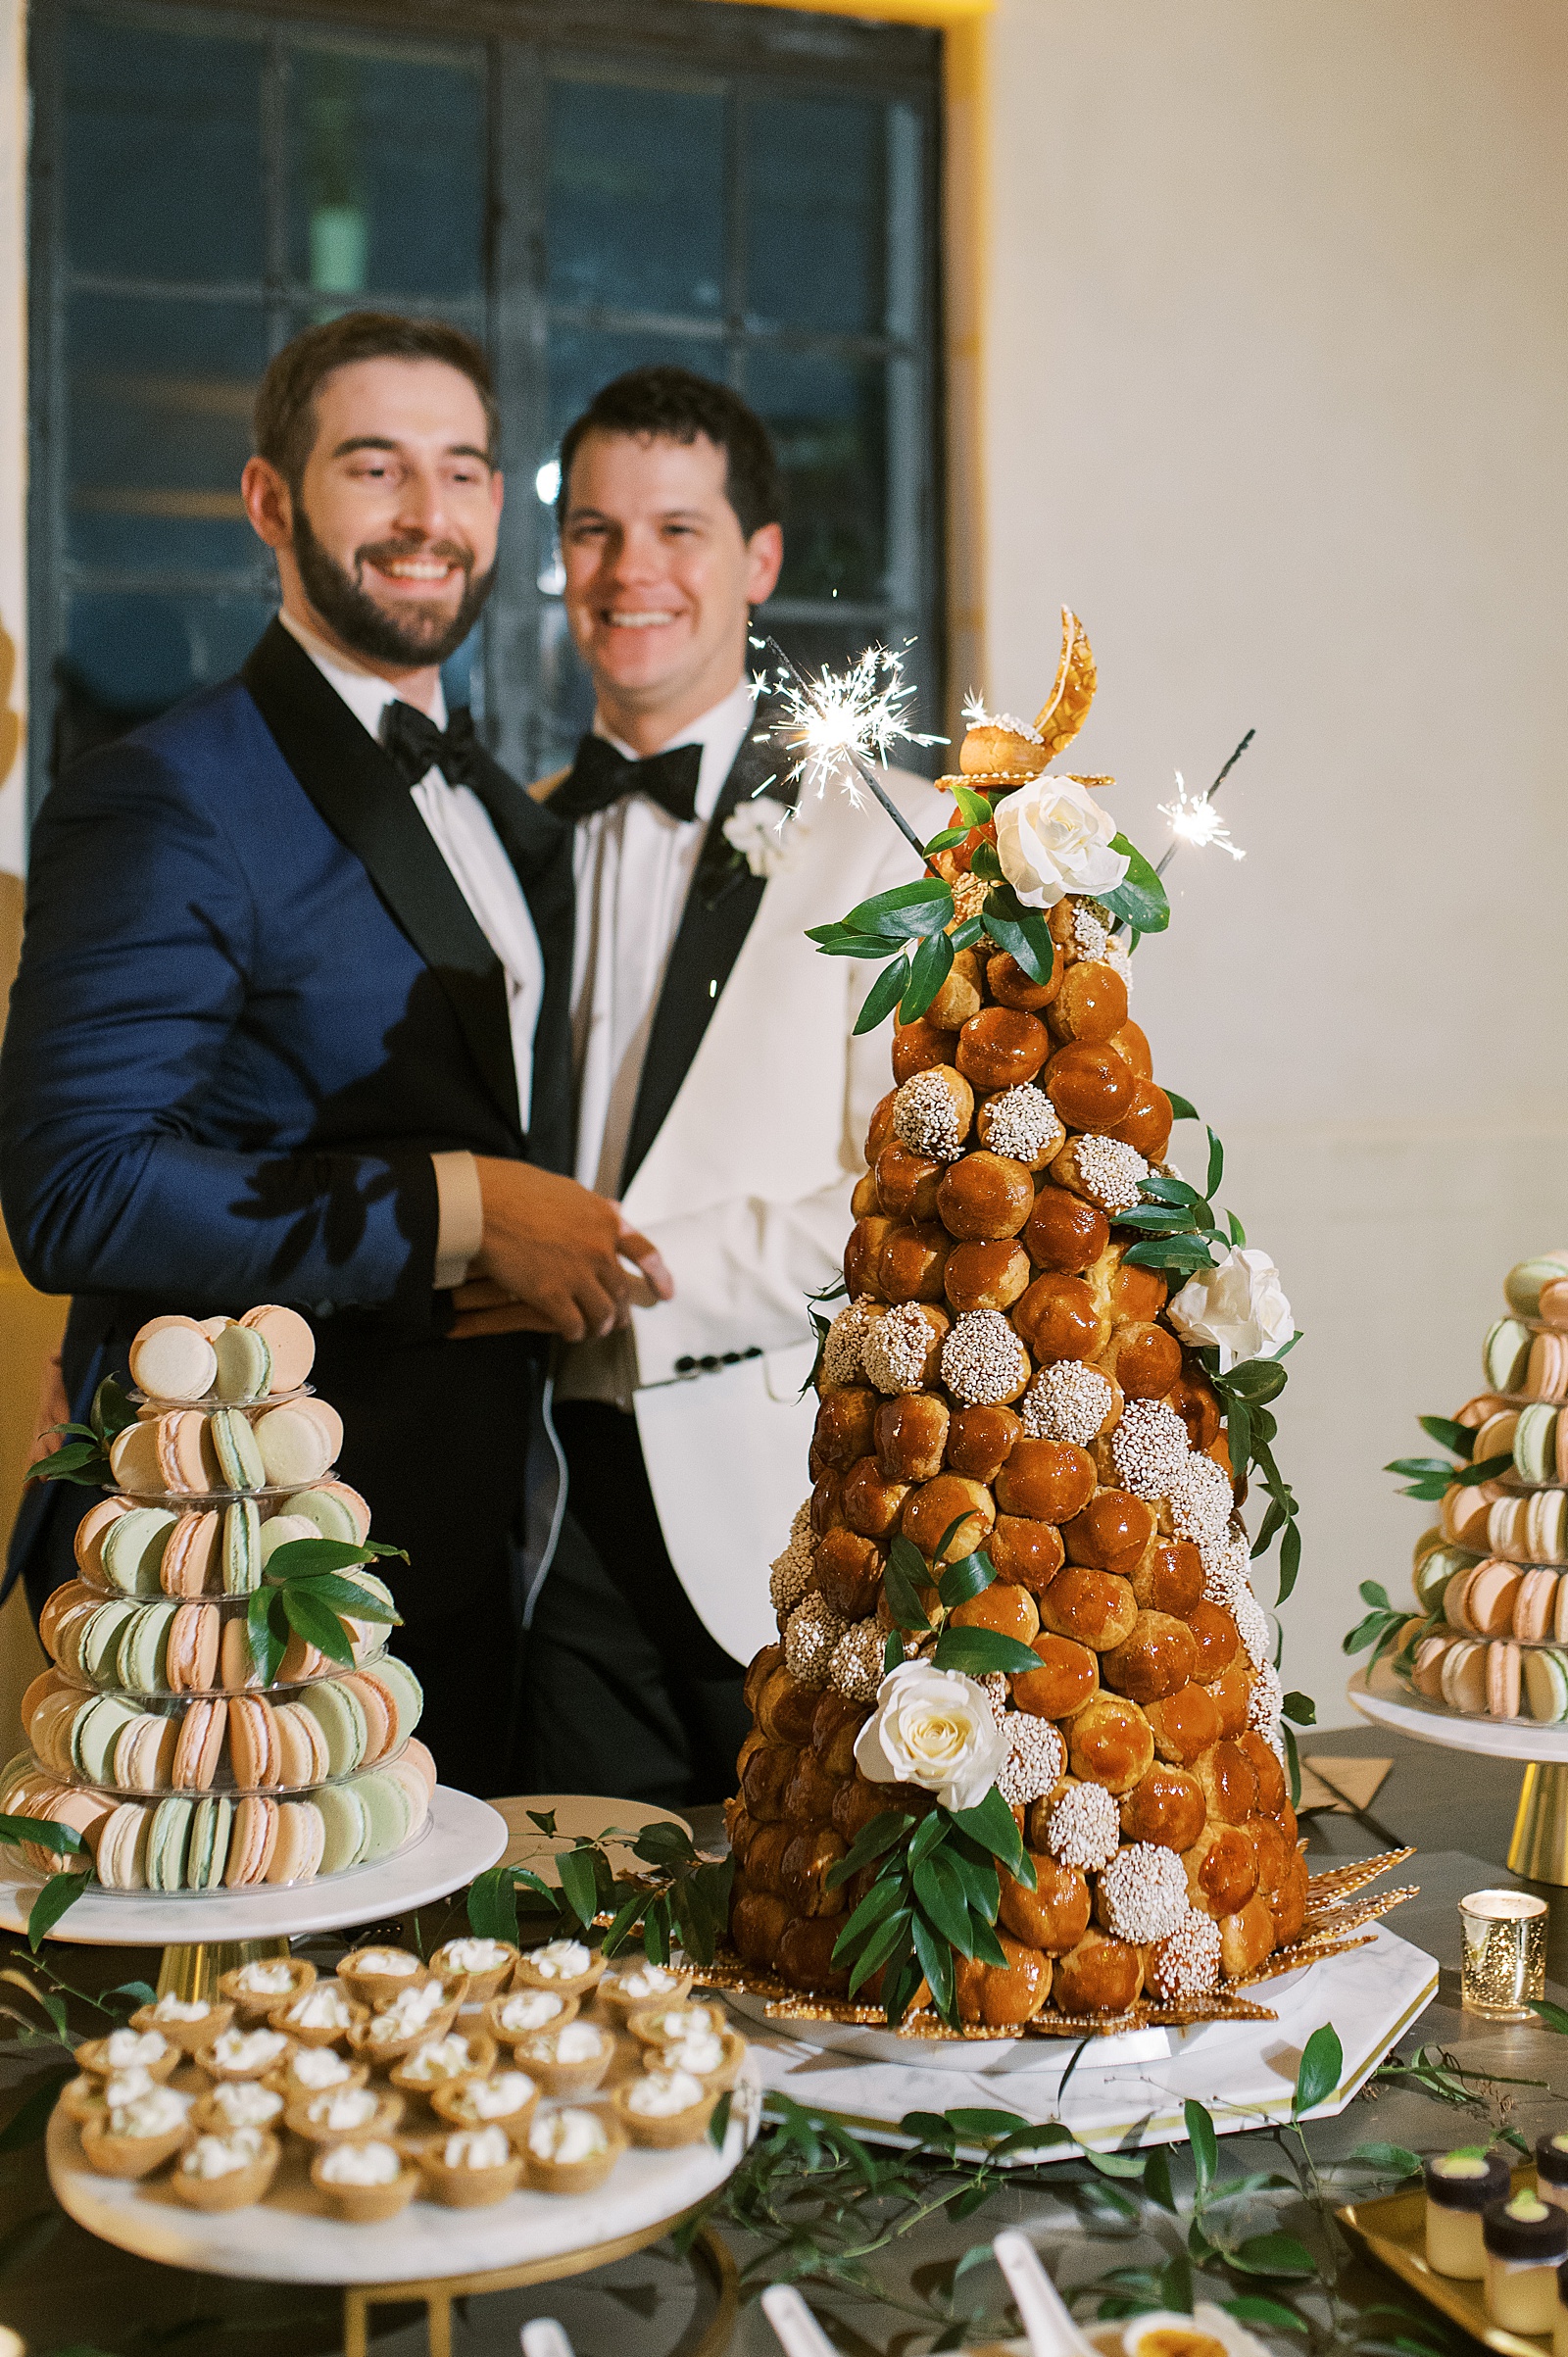 Two grooms stand behind a wedding croquembouche at their reception.